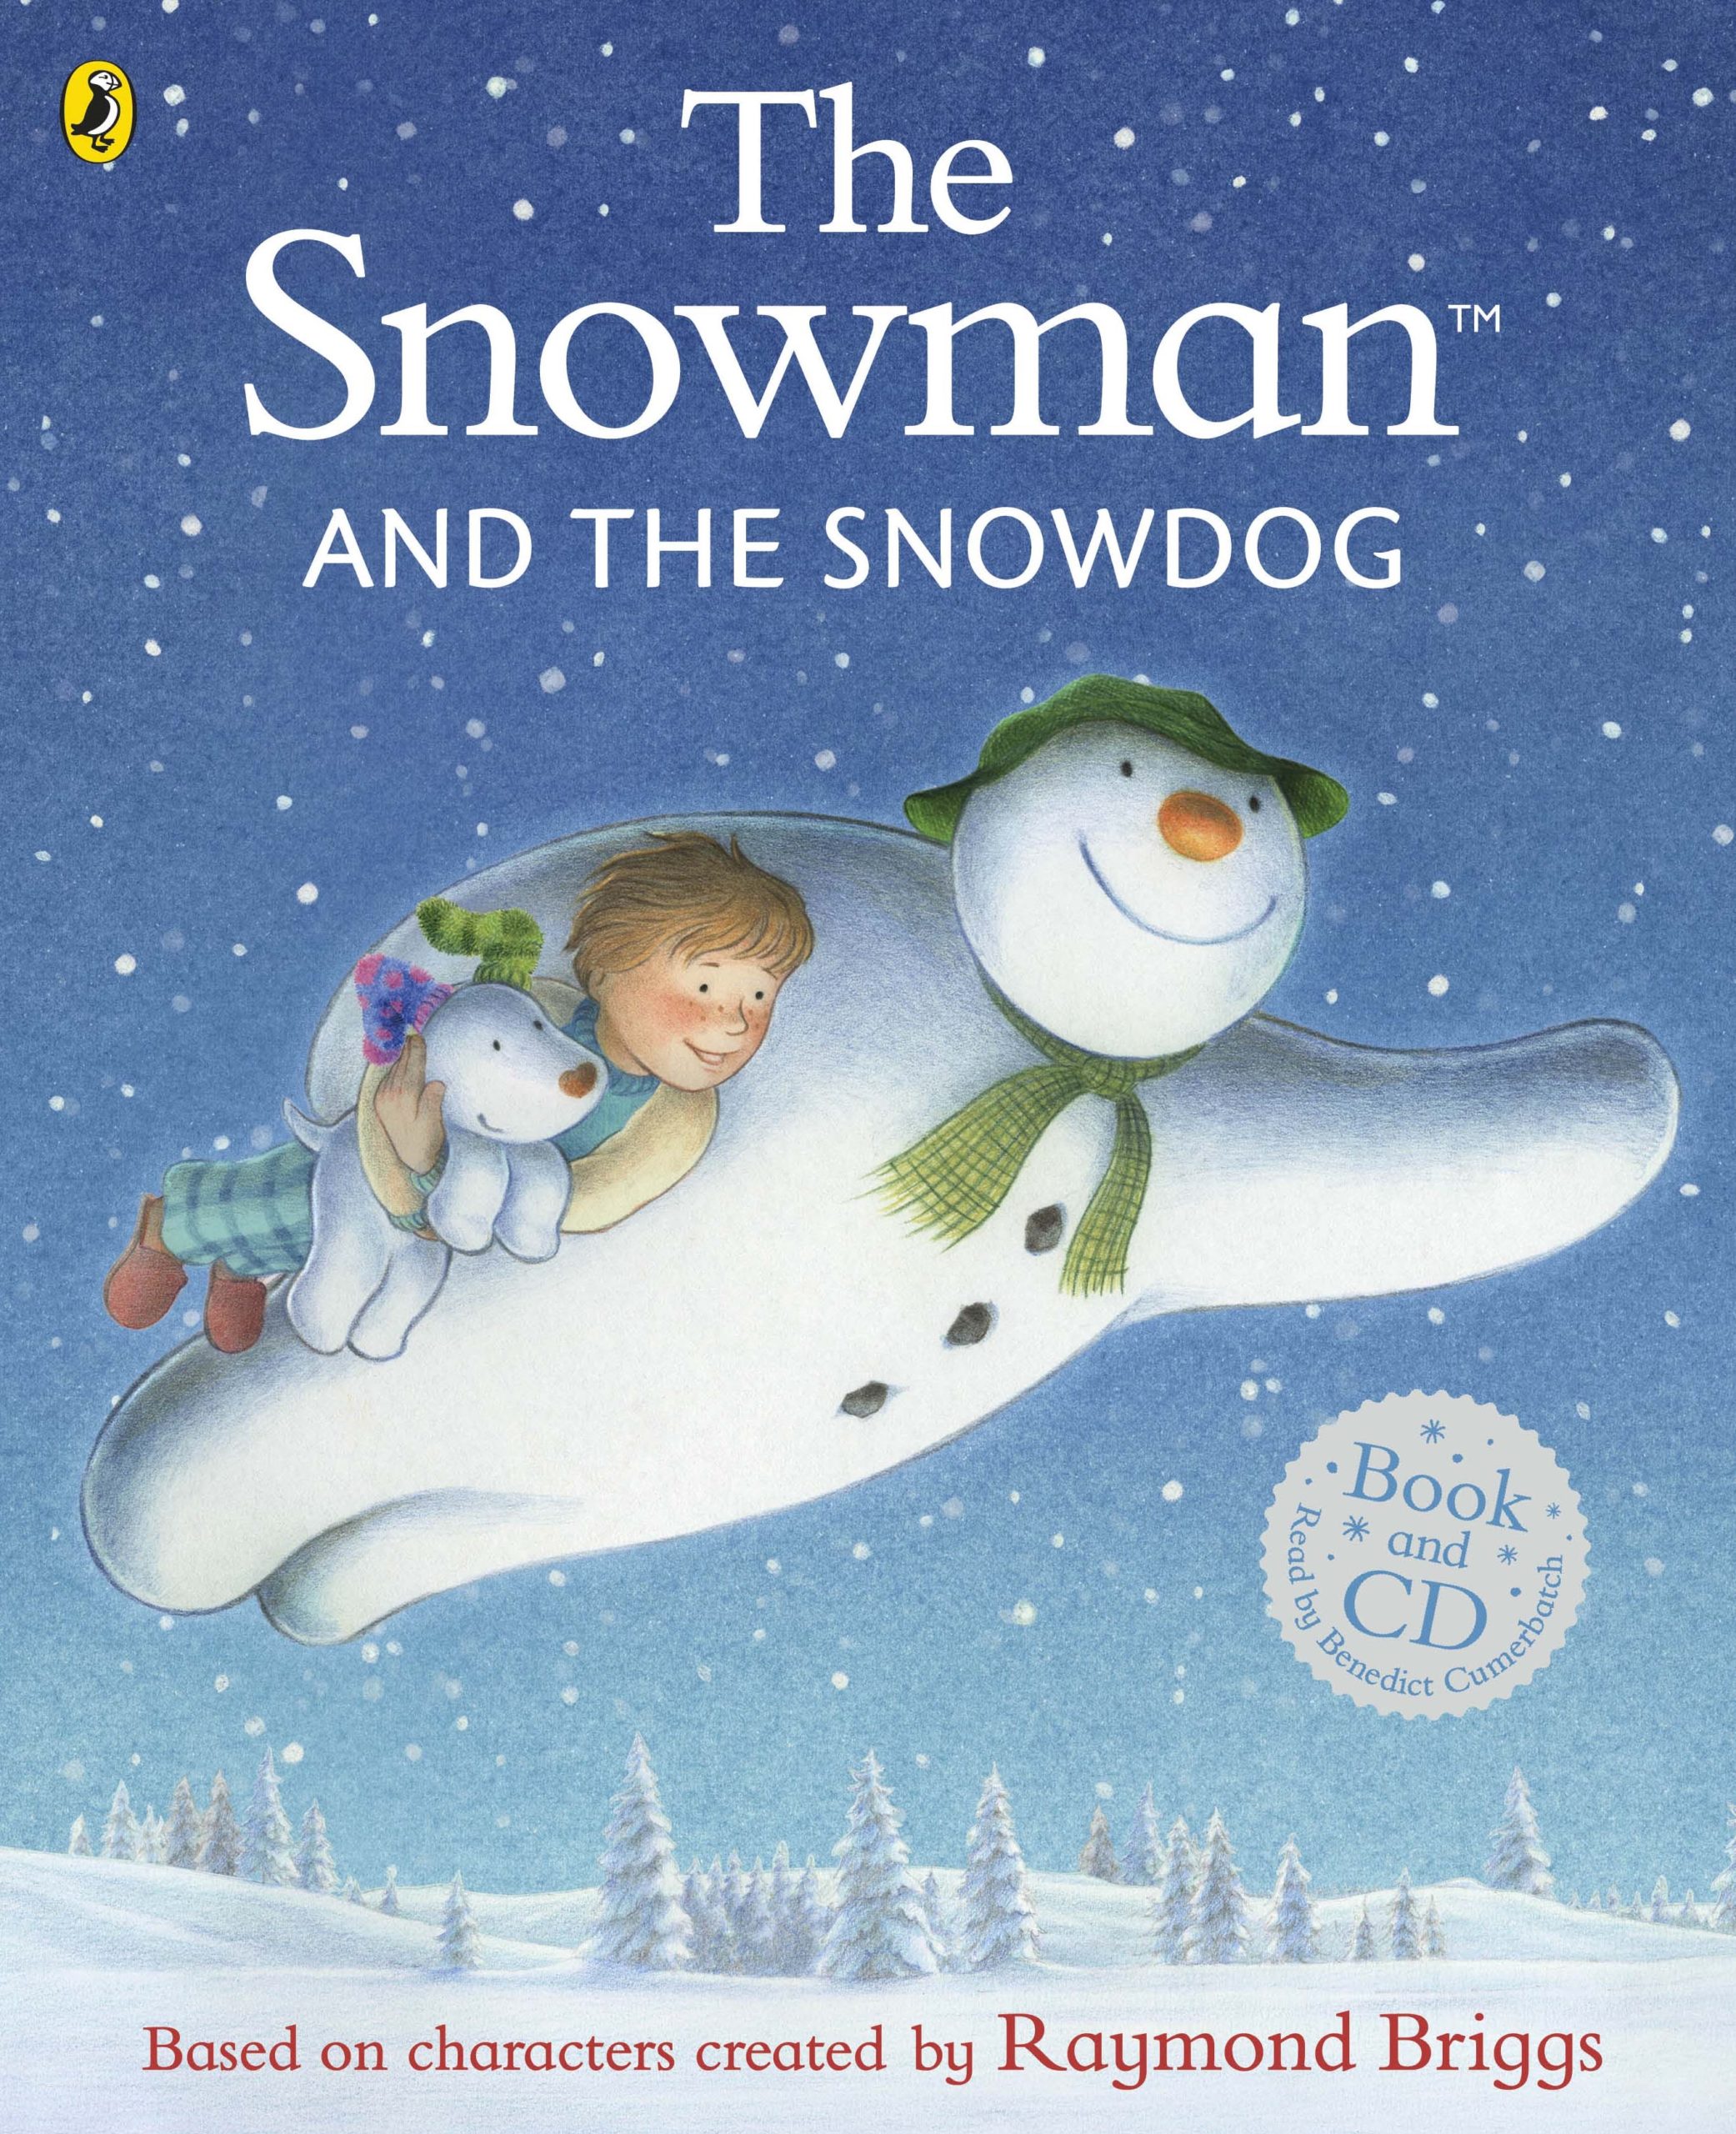 An image of the front cover of The Snowman and The Snowdog book of the film